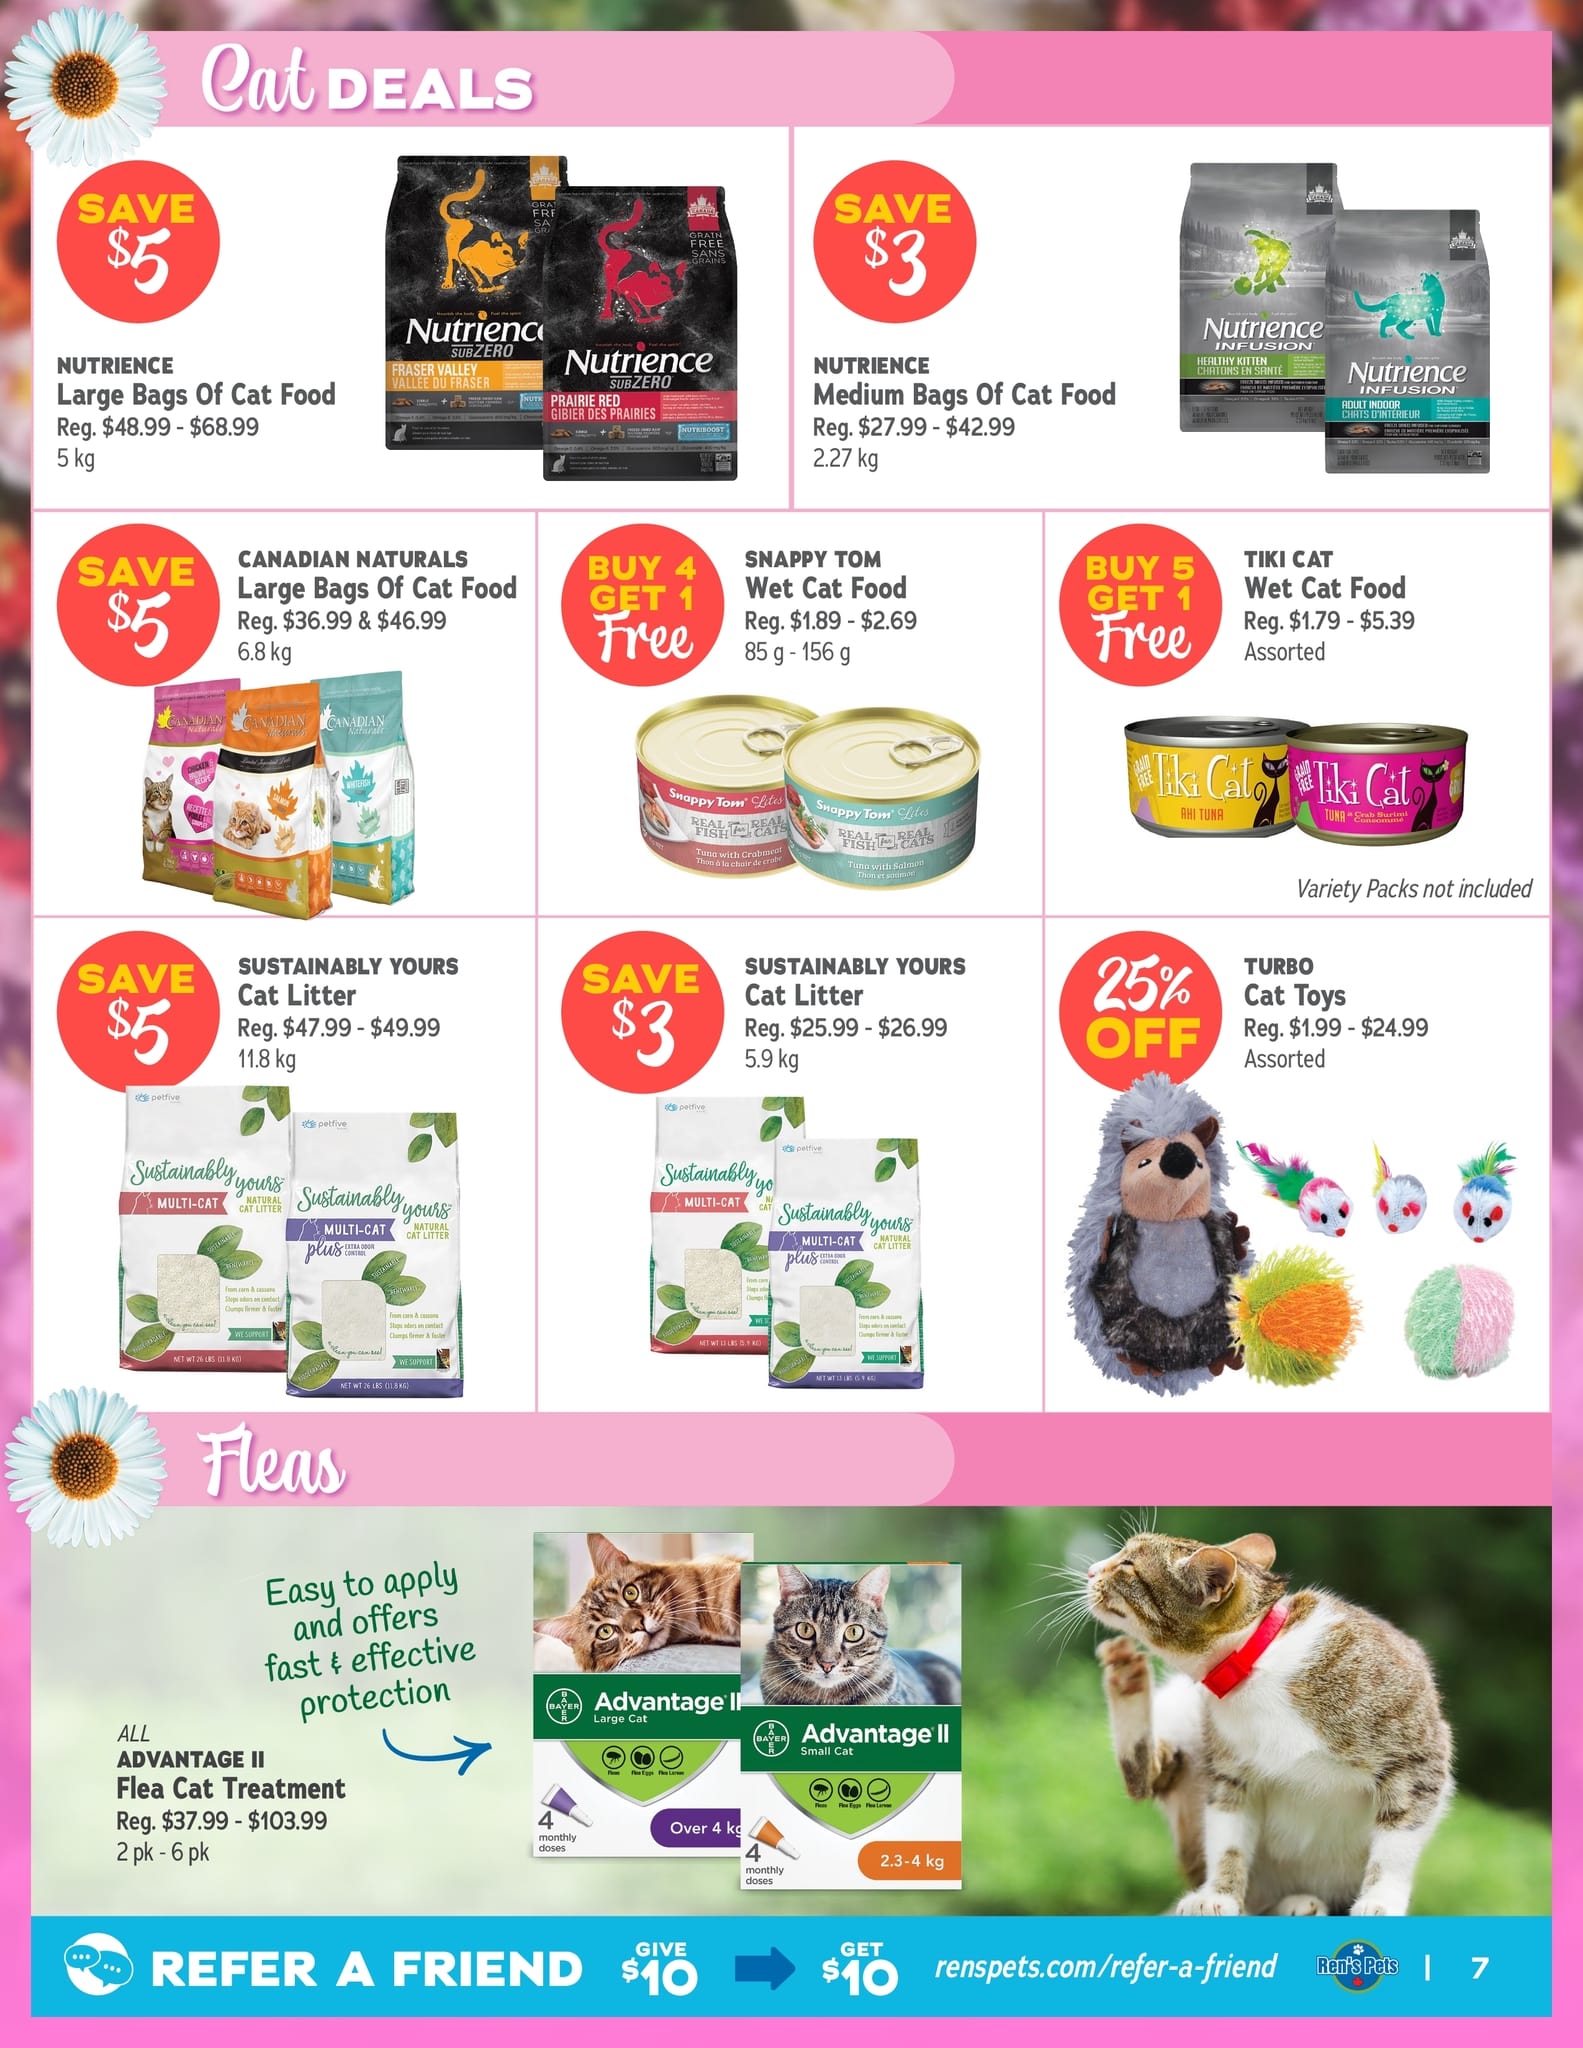 Ren’s Pets Depot - Monthly Savings - Page 7